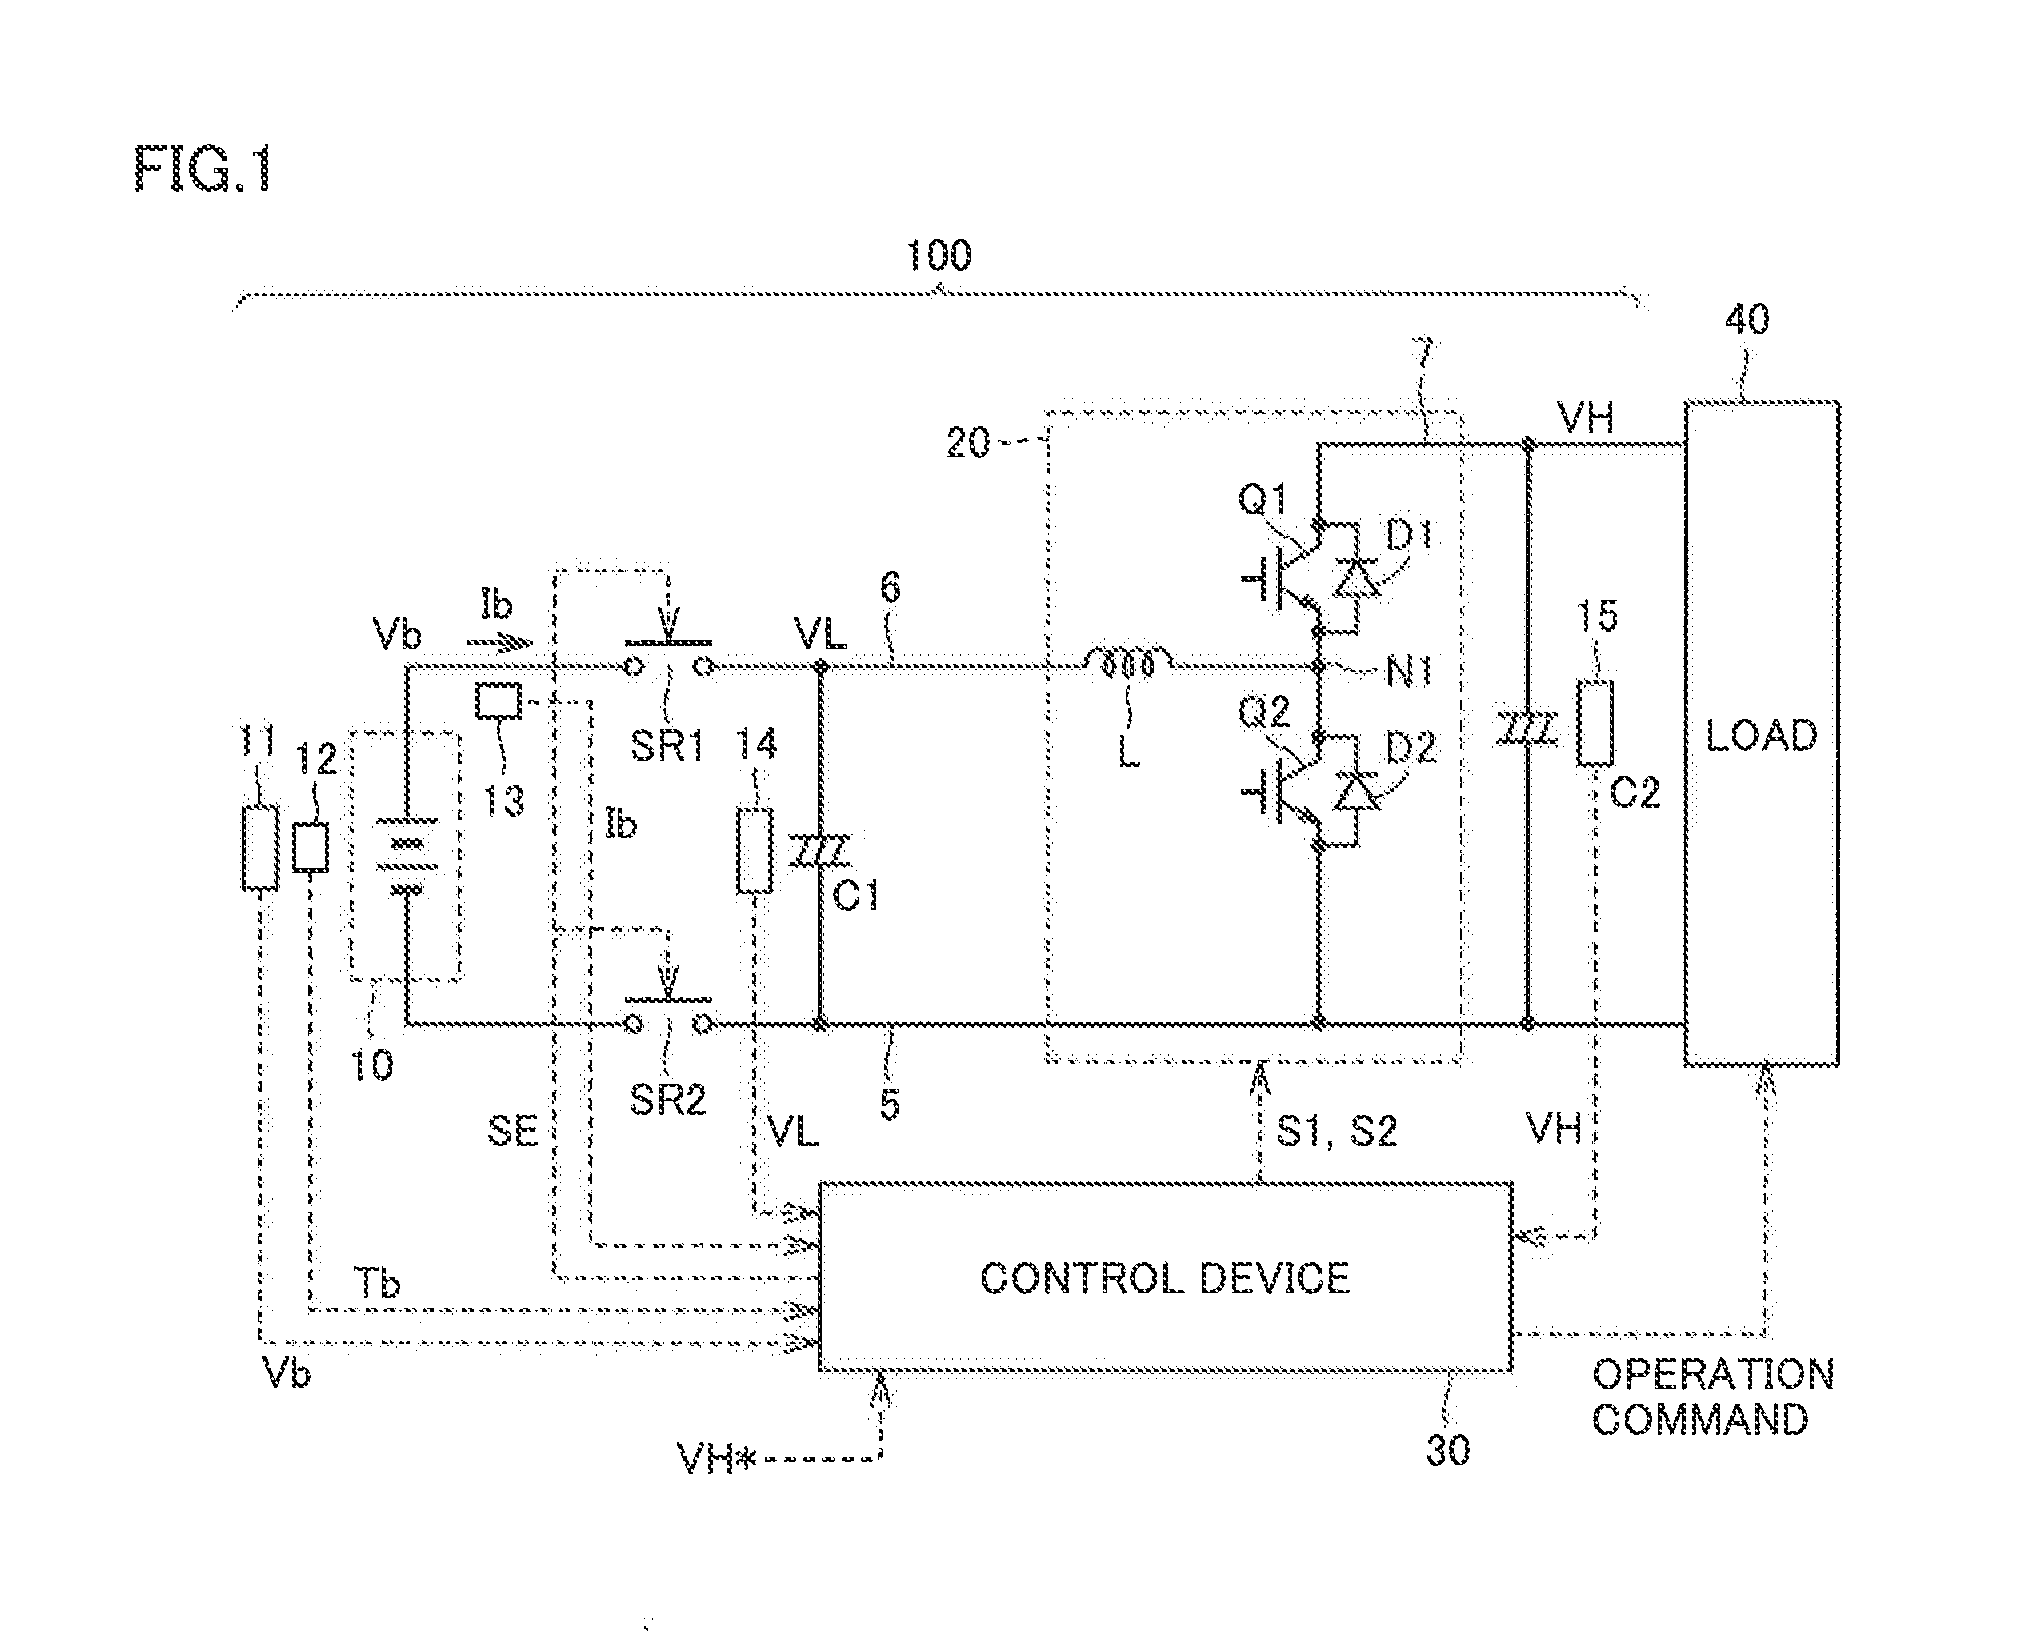 Power Supply System Applied to Electrically Powered Vehicle